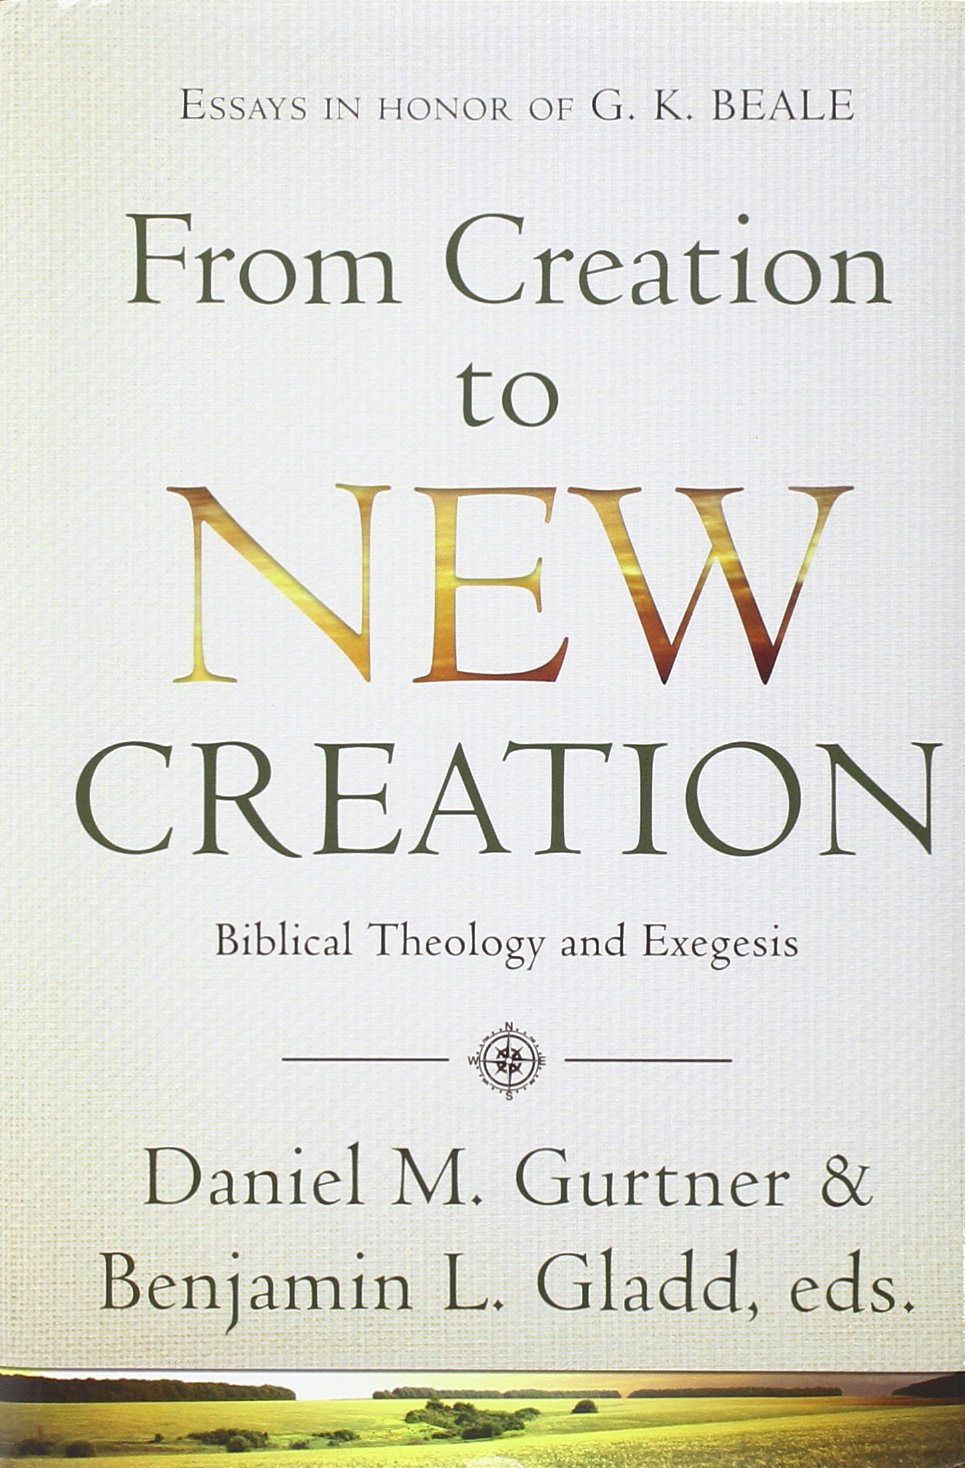 Book Notice: FROM CREATION TO NEW CREATION: BIBLICAL THEOLOGY AND EXEGESIS (ESSAYS IN HONOR OF G.K. BEALE)